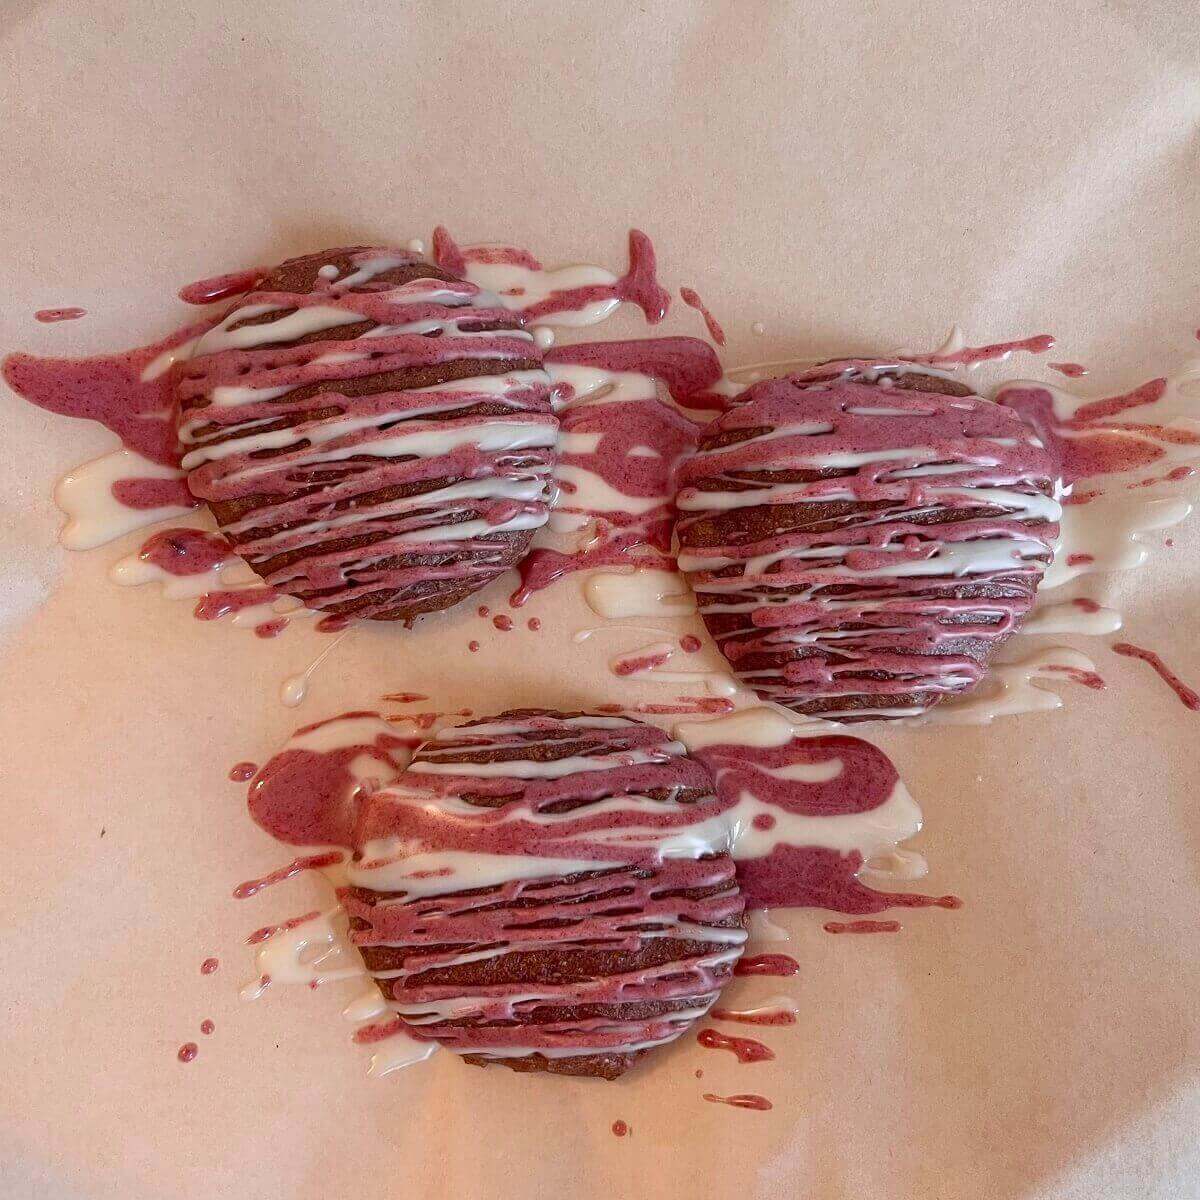 Three cookies drizzled with pink and white chocolate.